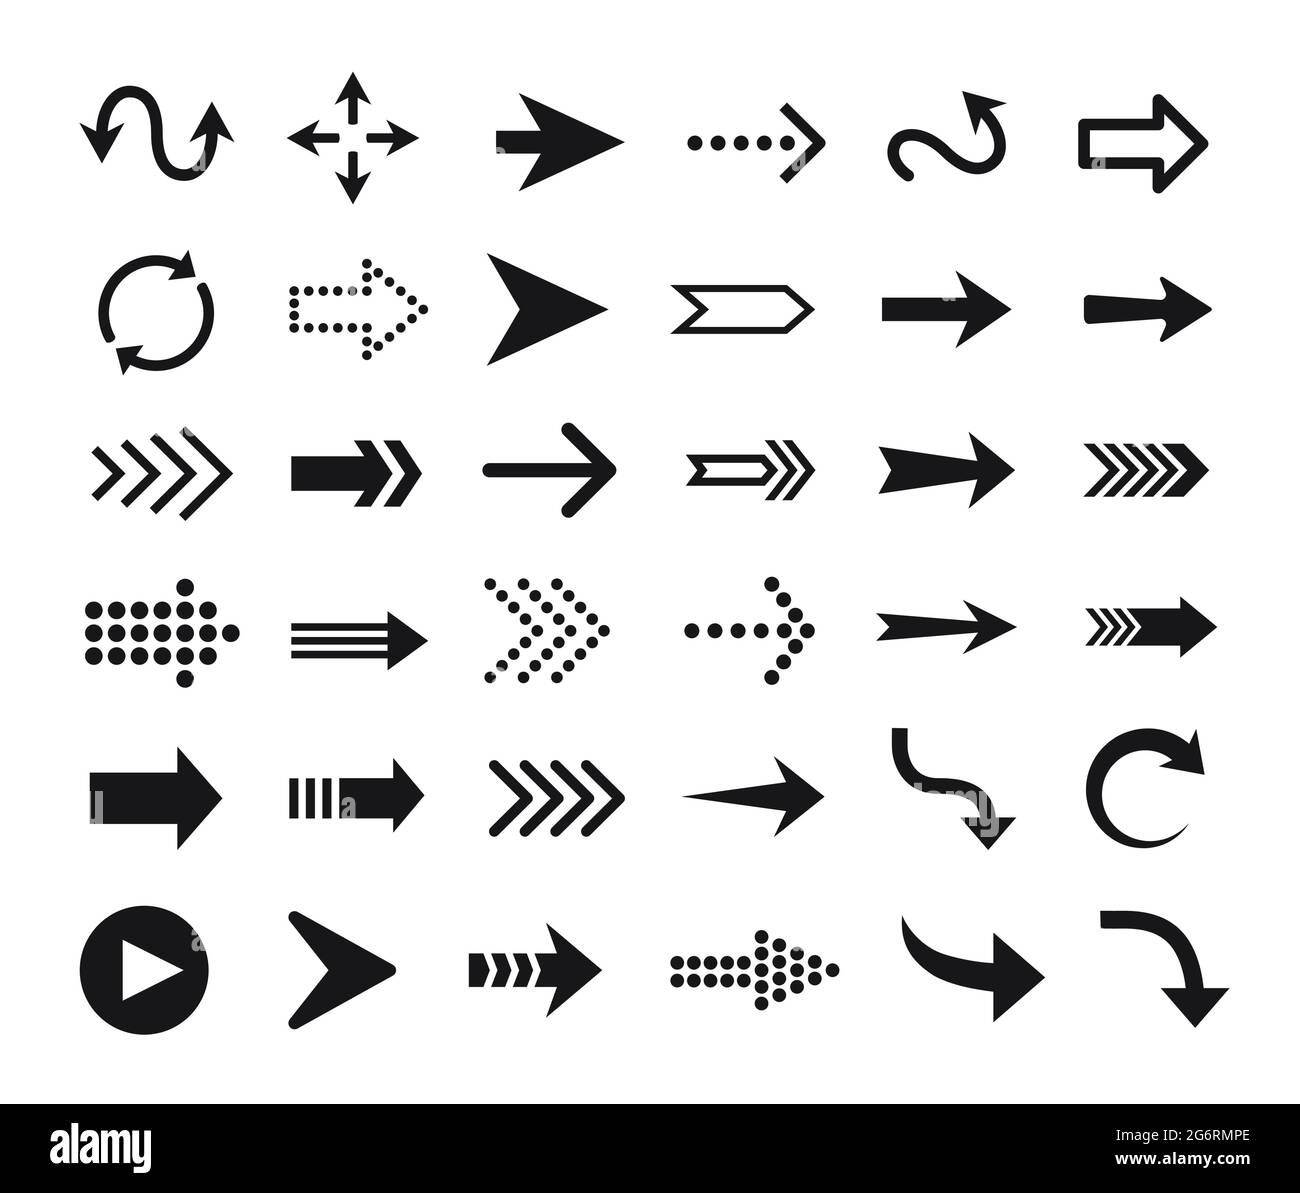 Arrow icon. Arrows pictograms, buttons, web cursors, pointers. Up, down, right, left direction signs. Curve and straight arrows symbol vector set. Navigation, location and orientation sign Stock Vector